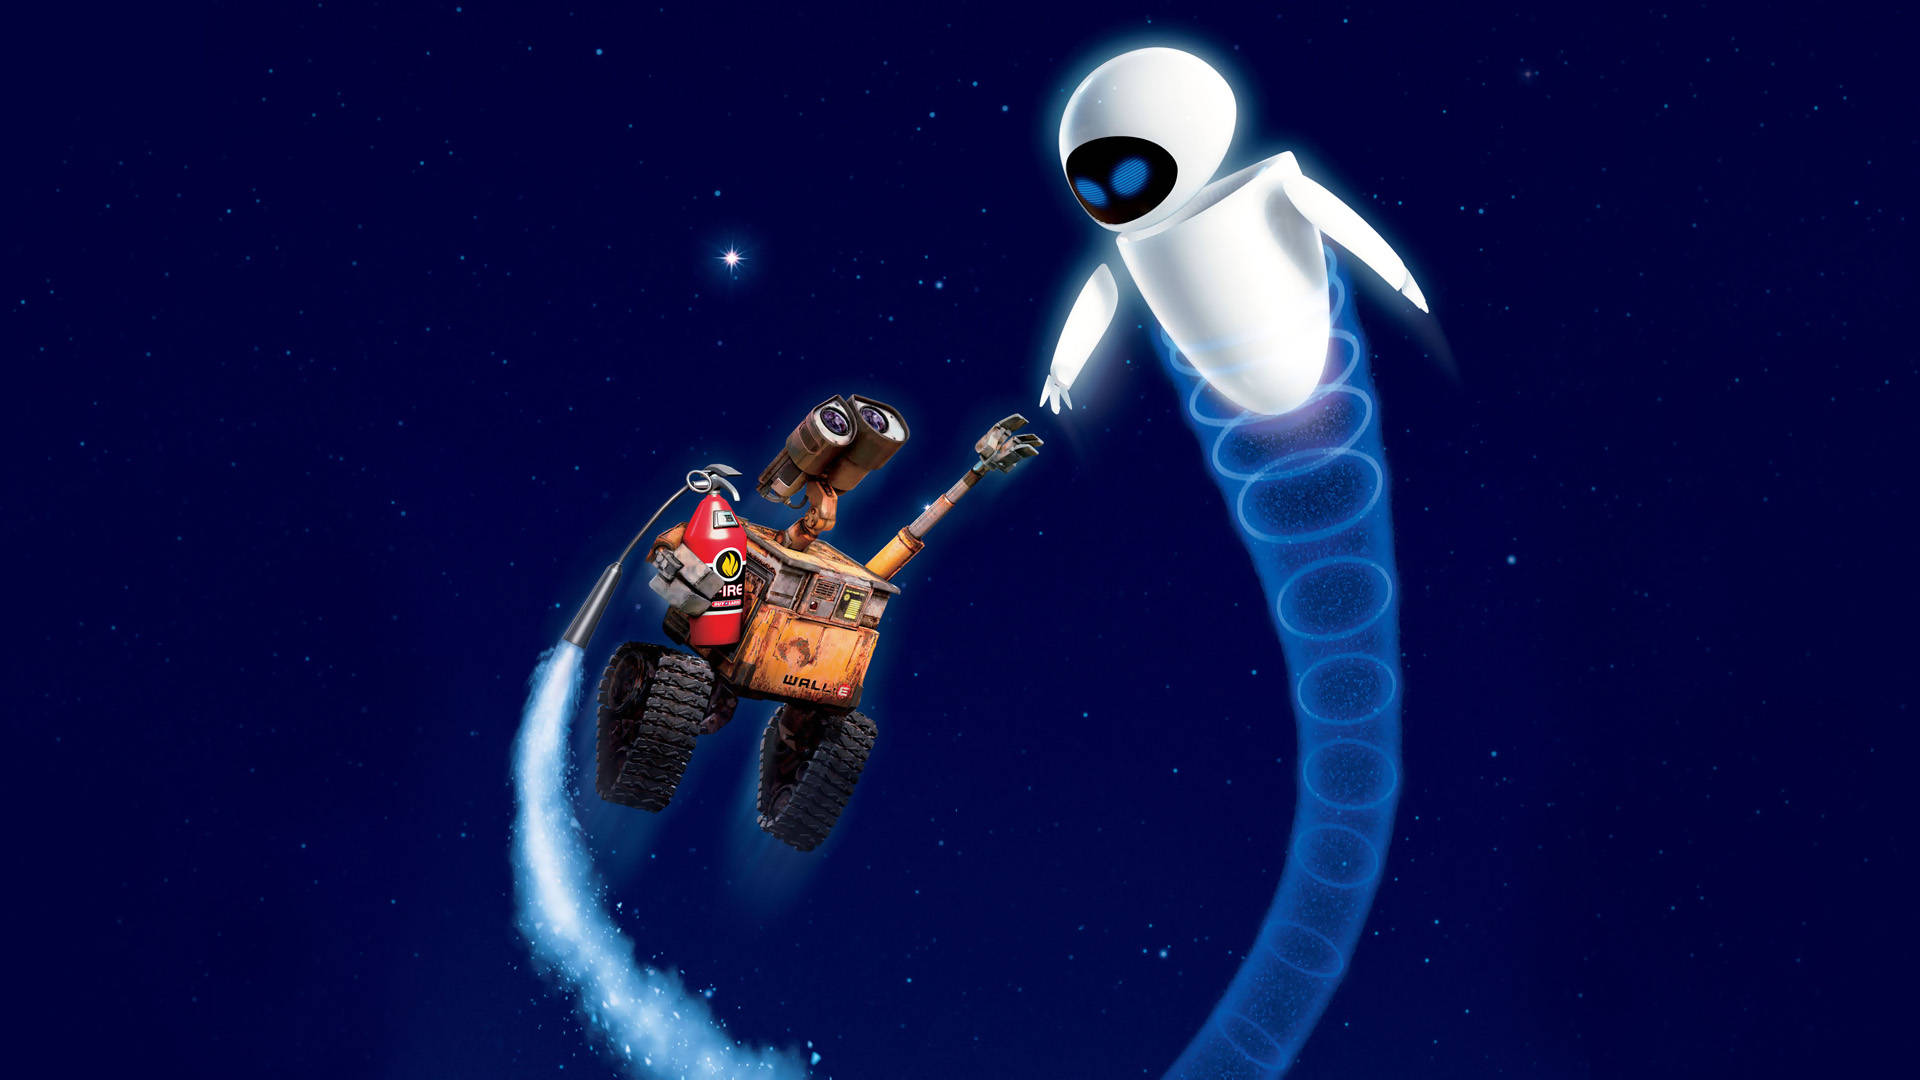 Wall E And Eve In The Galaxy Background